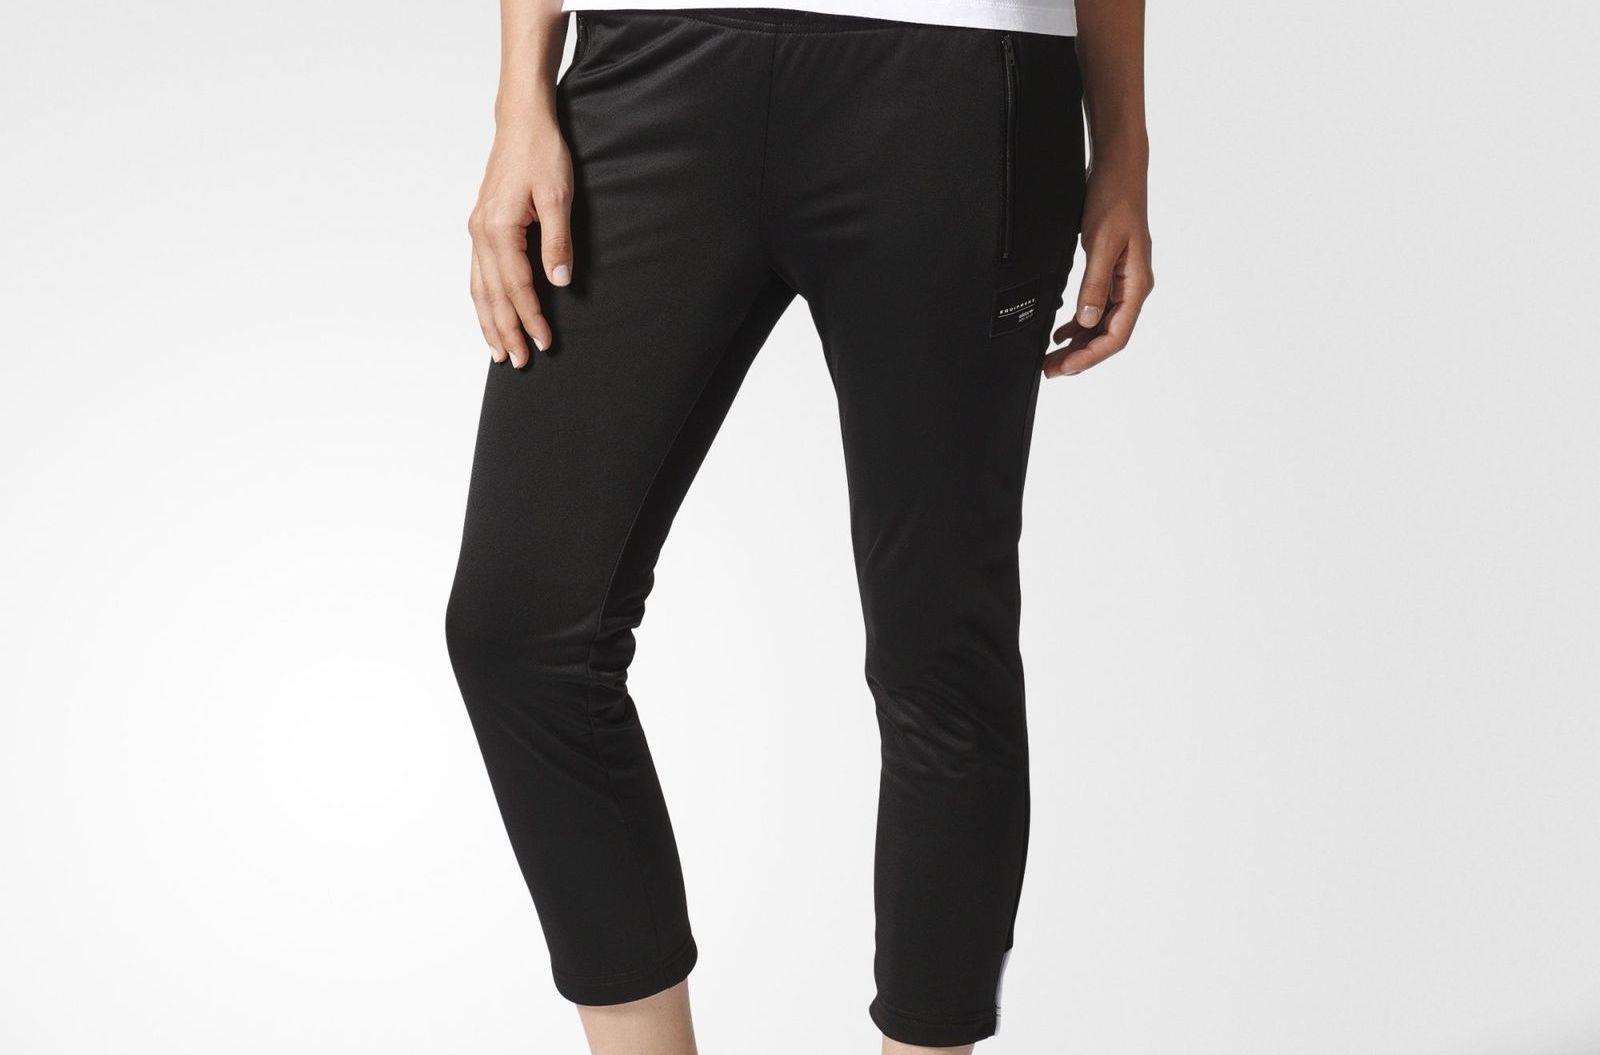 These women’s black EQT cigarette pants from adidas are for £24.98 including free postage